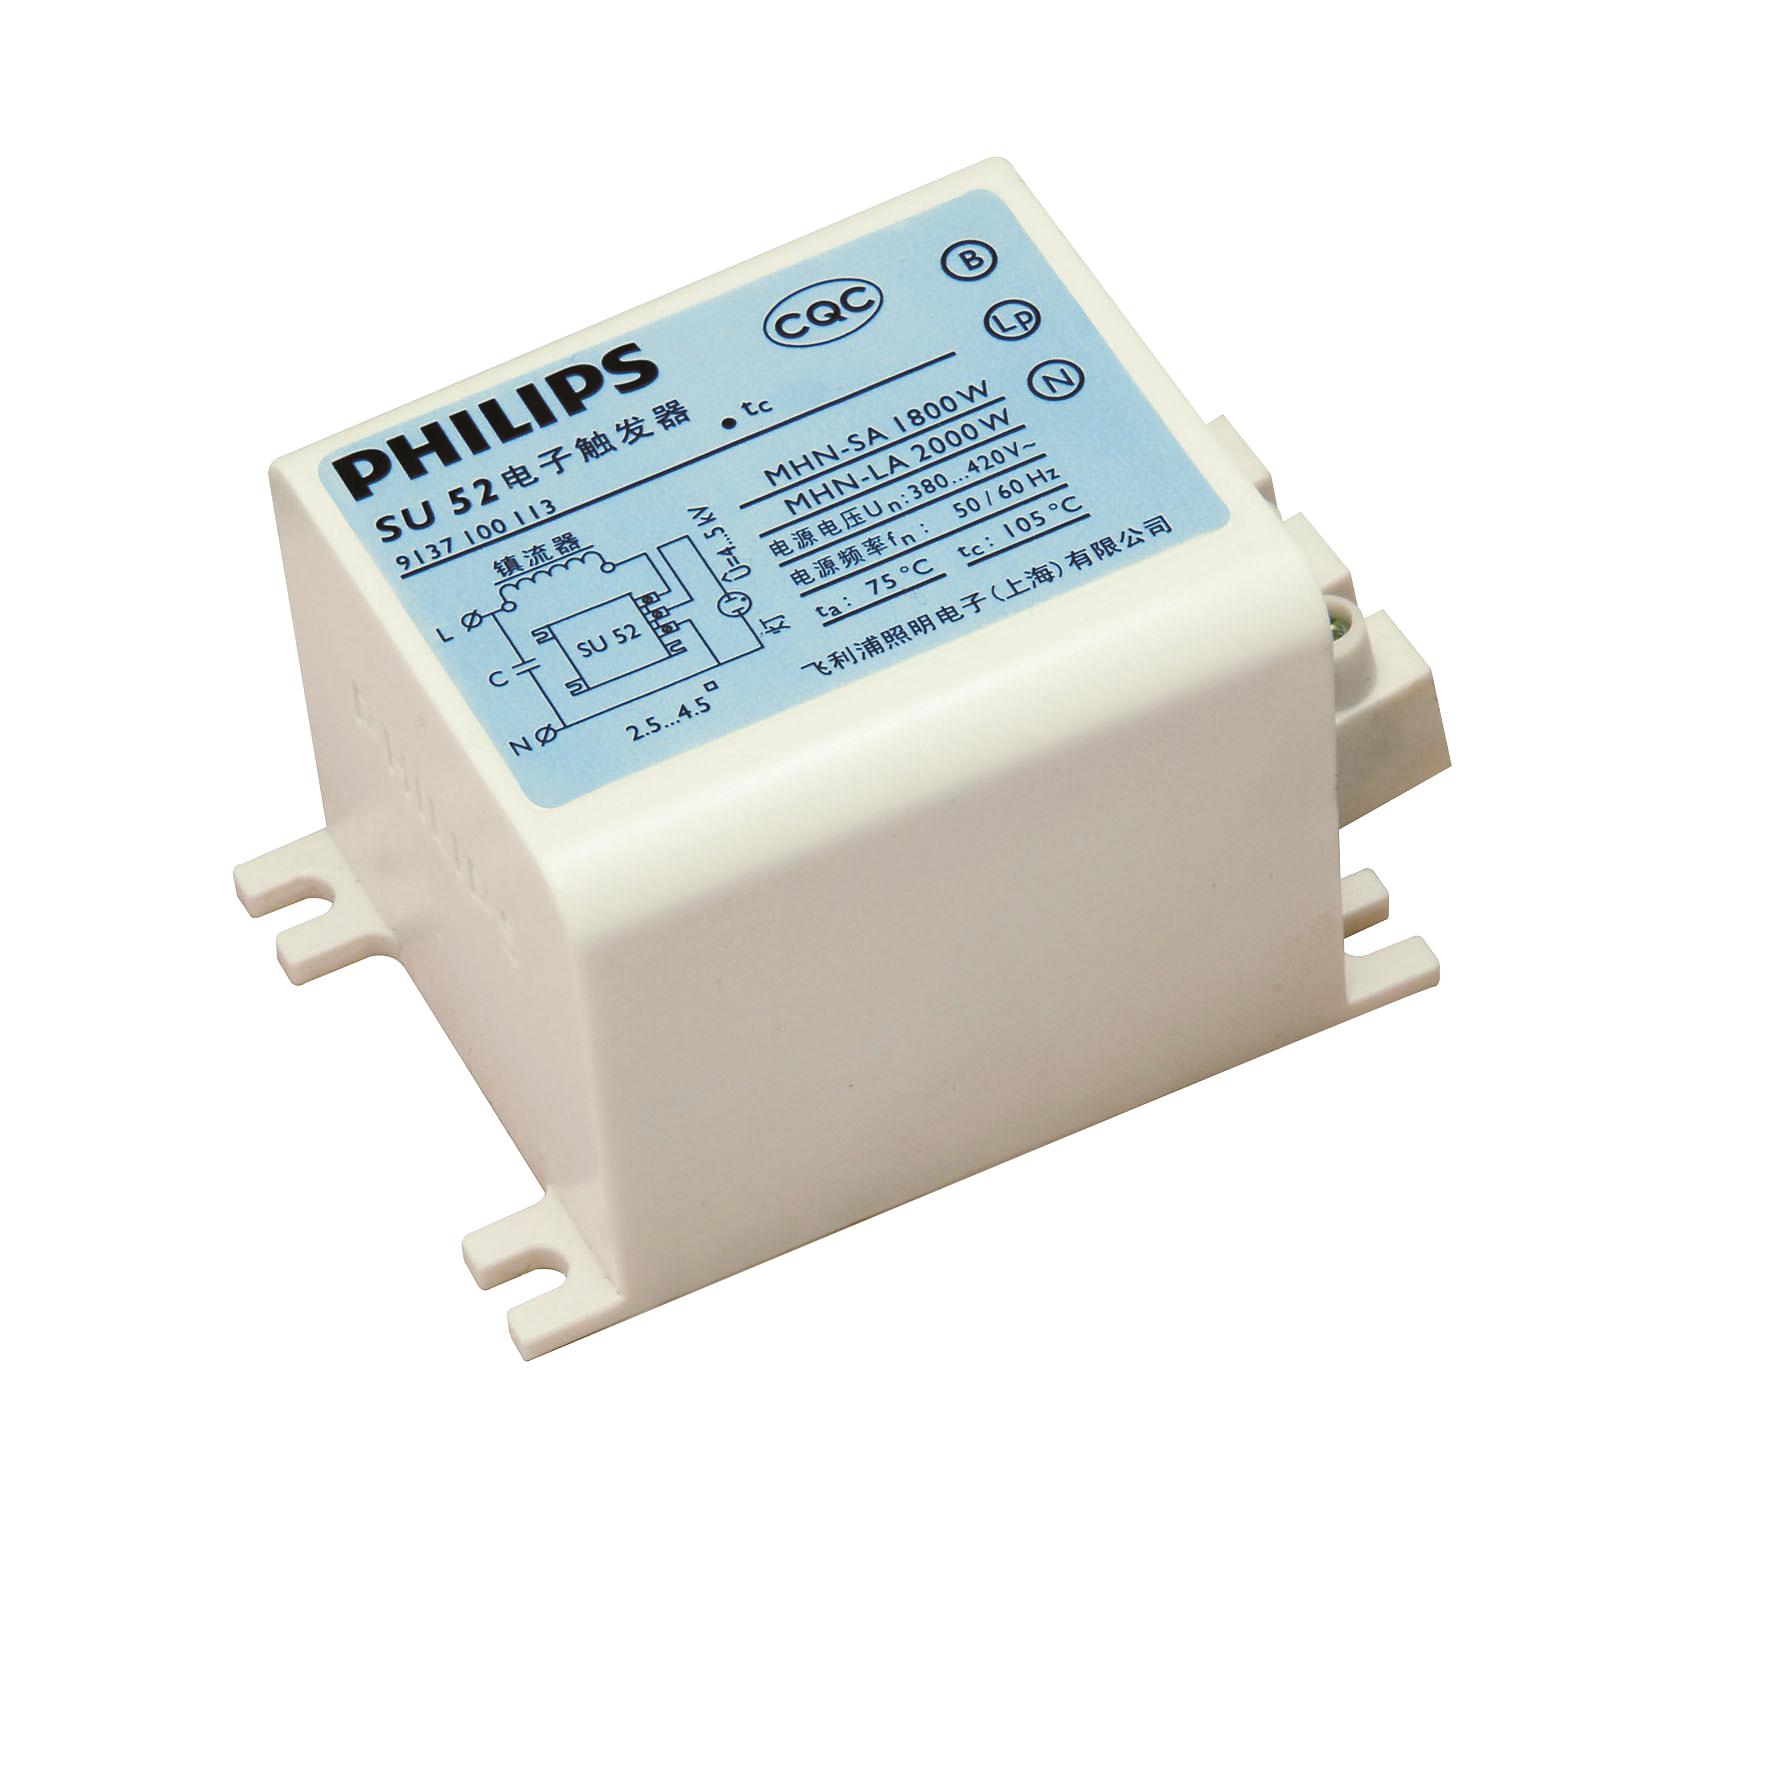 Electronic series ignitor for HID lamp circuits